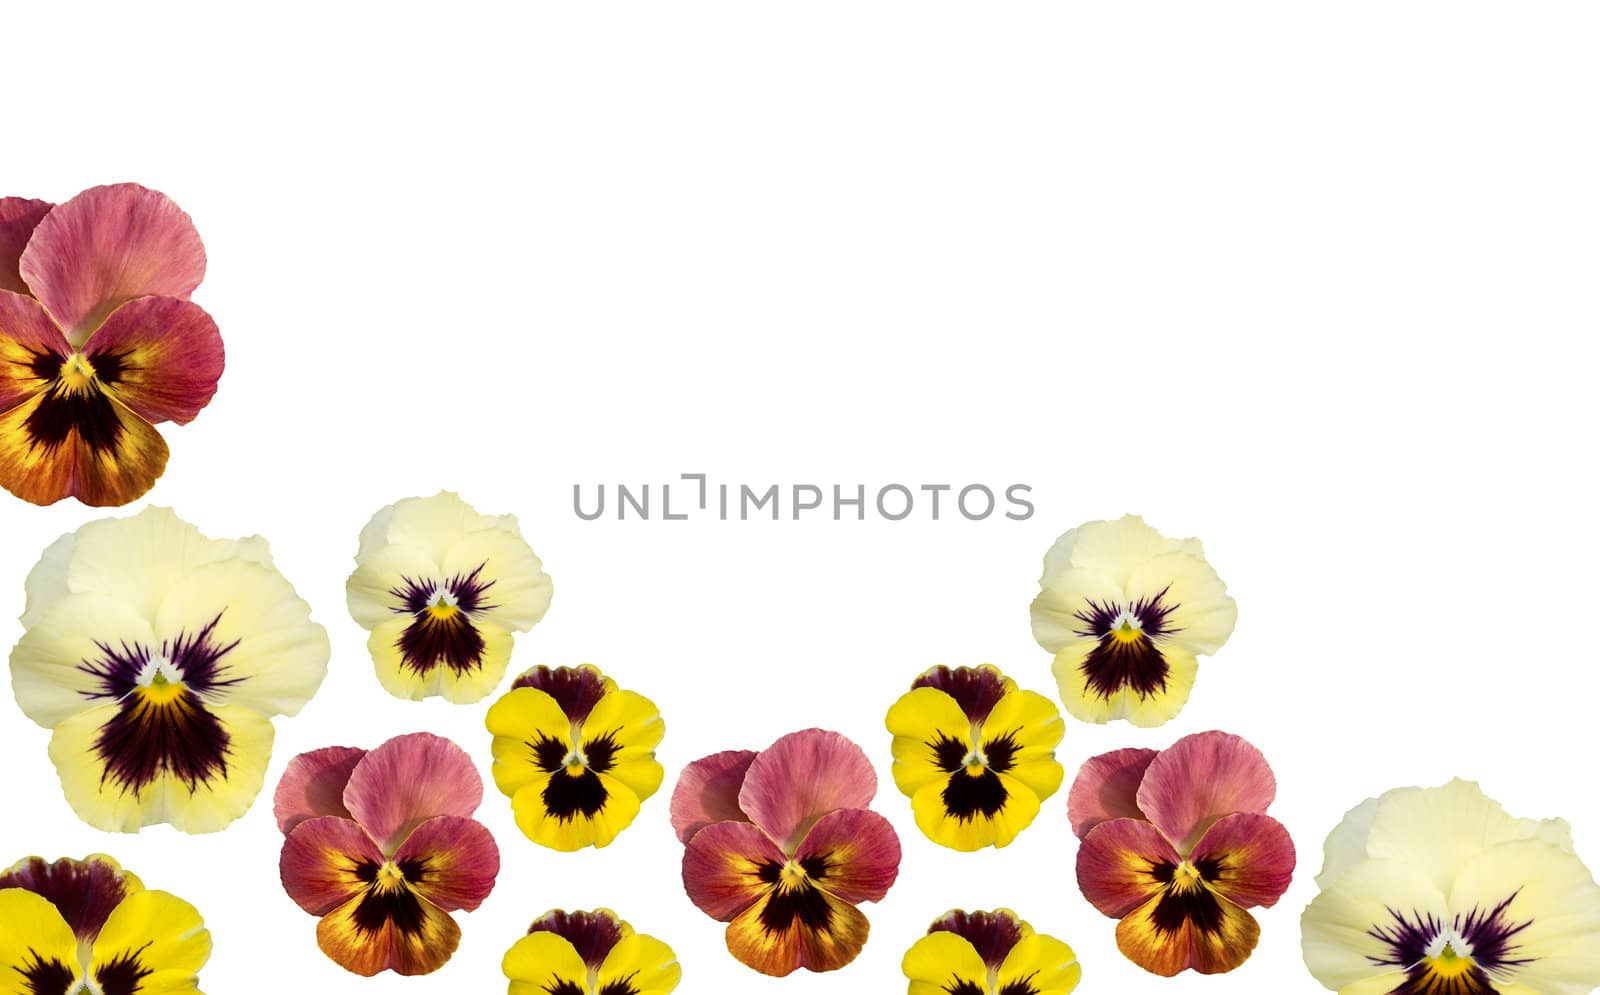 spring pansy flower border isolated on white copy space background